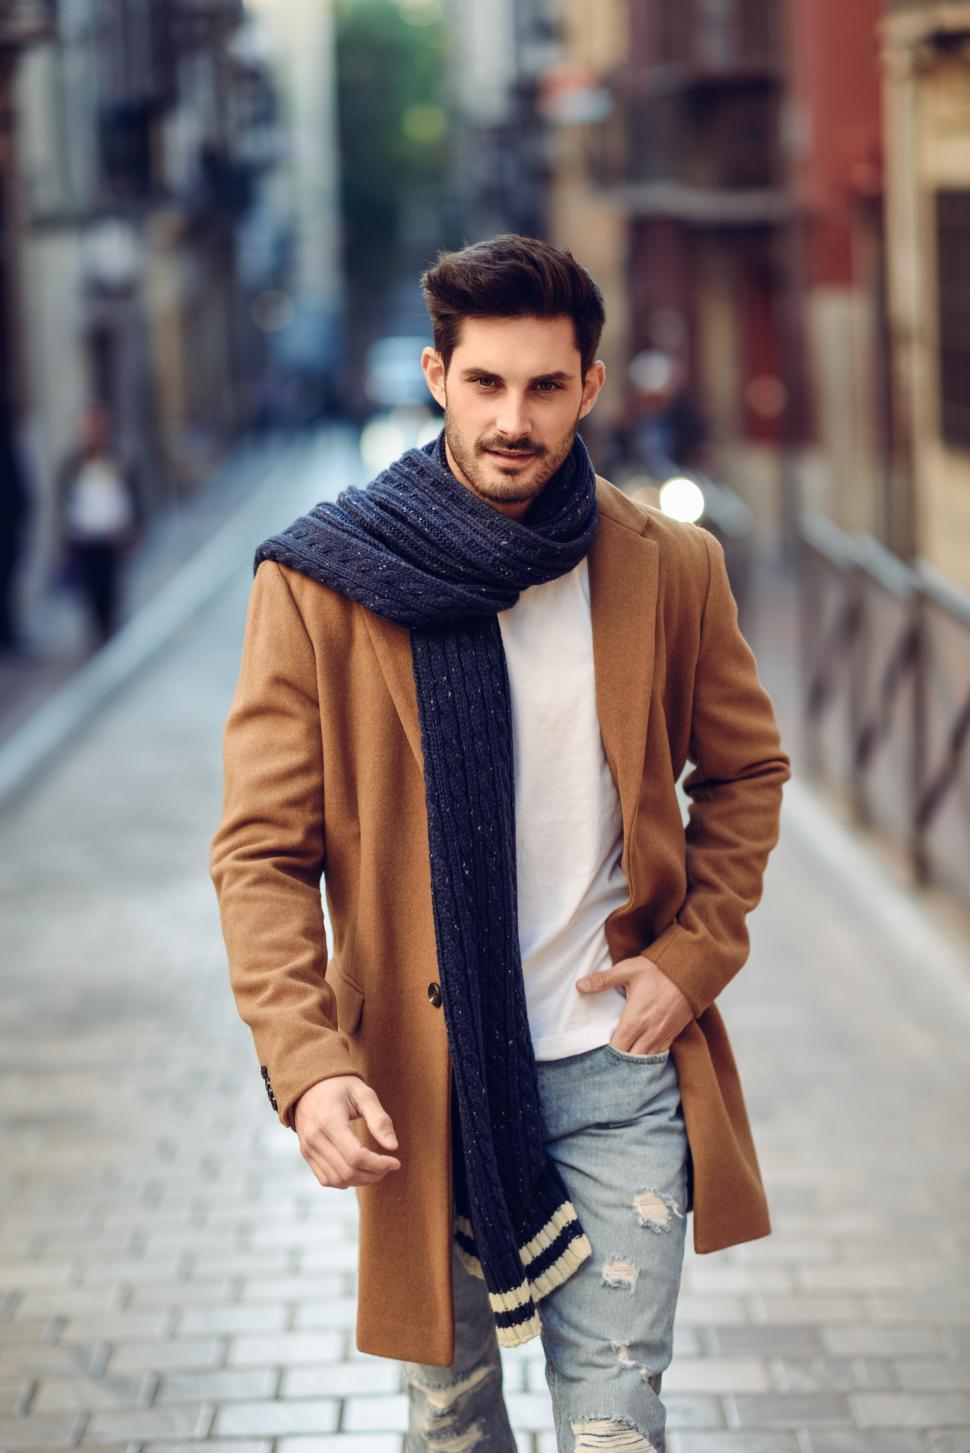 Free Image of Young man wearing winter clothes in the street. 